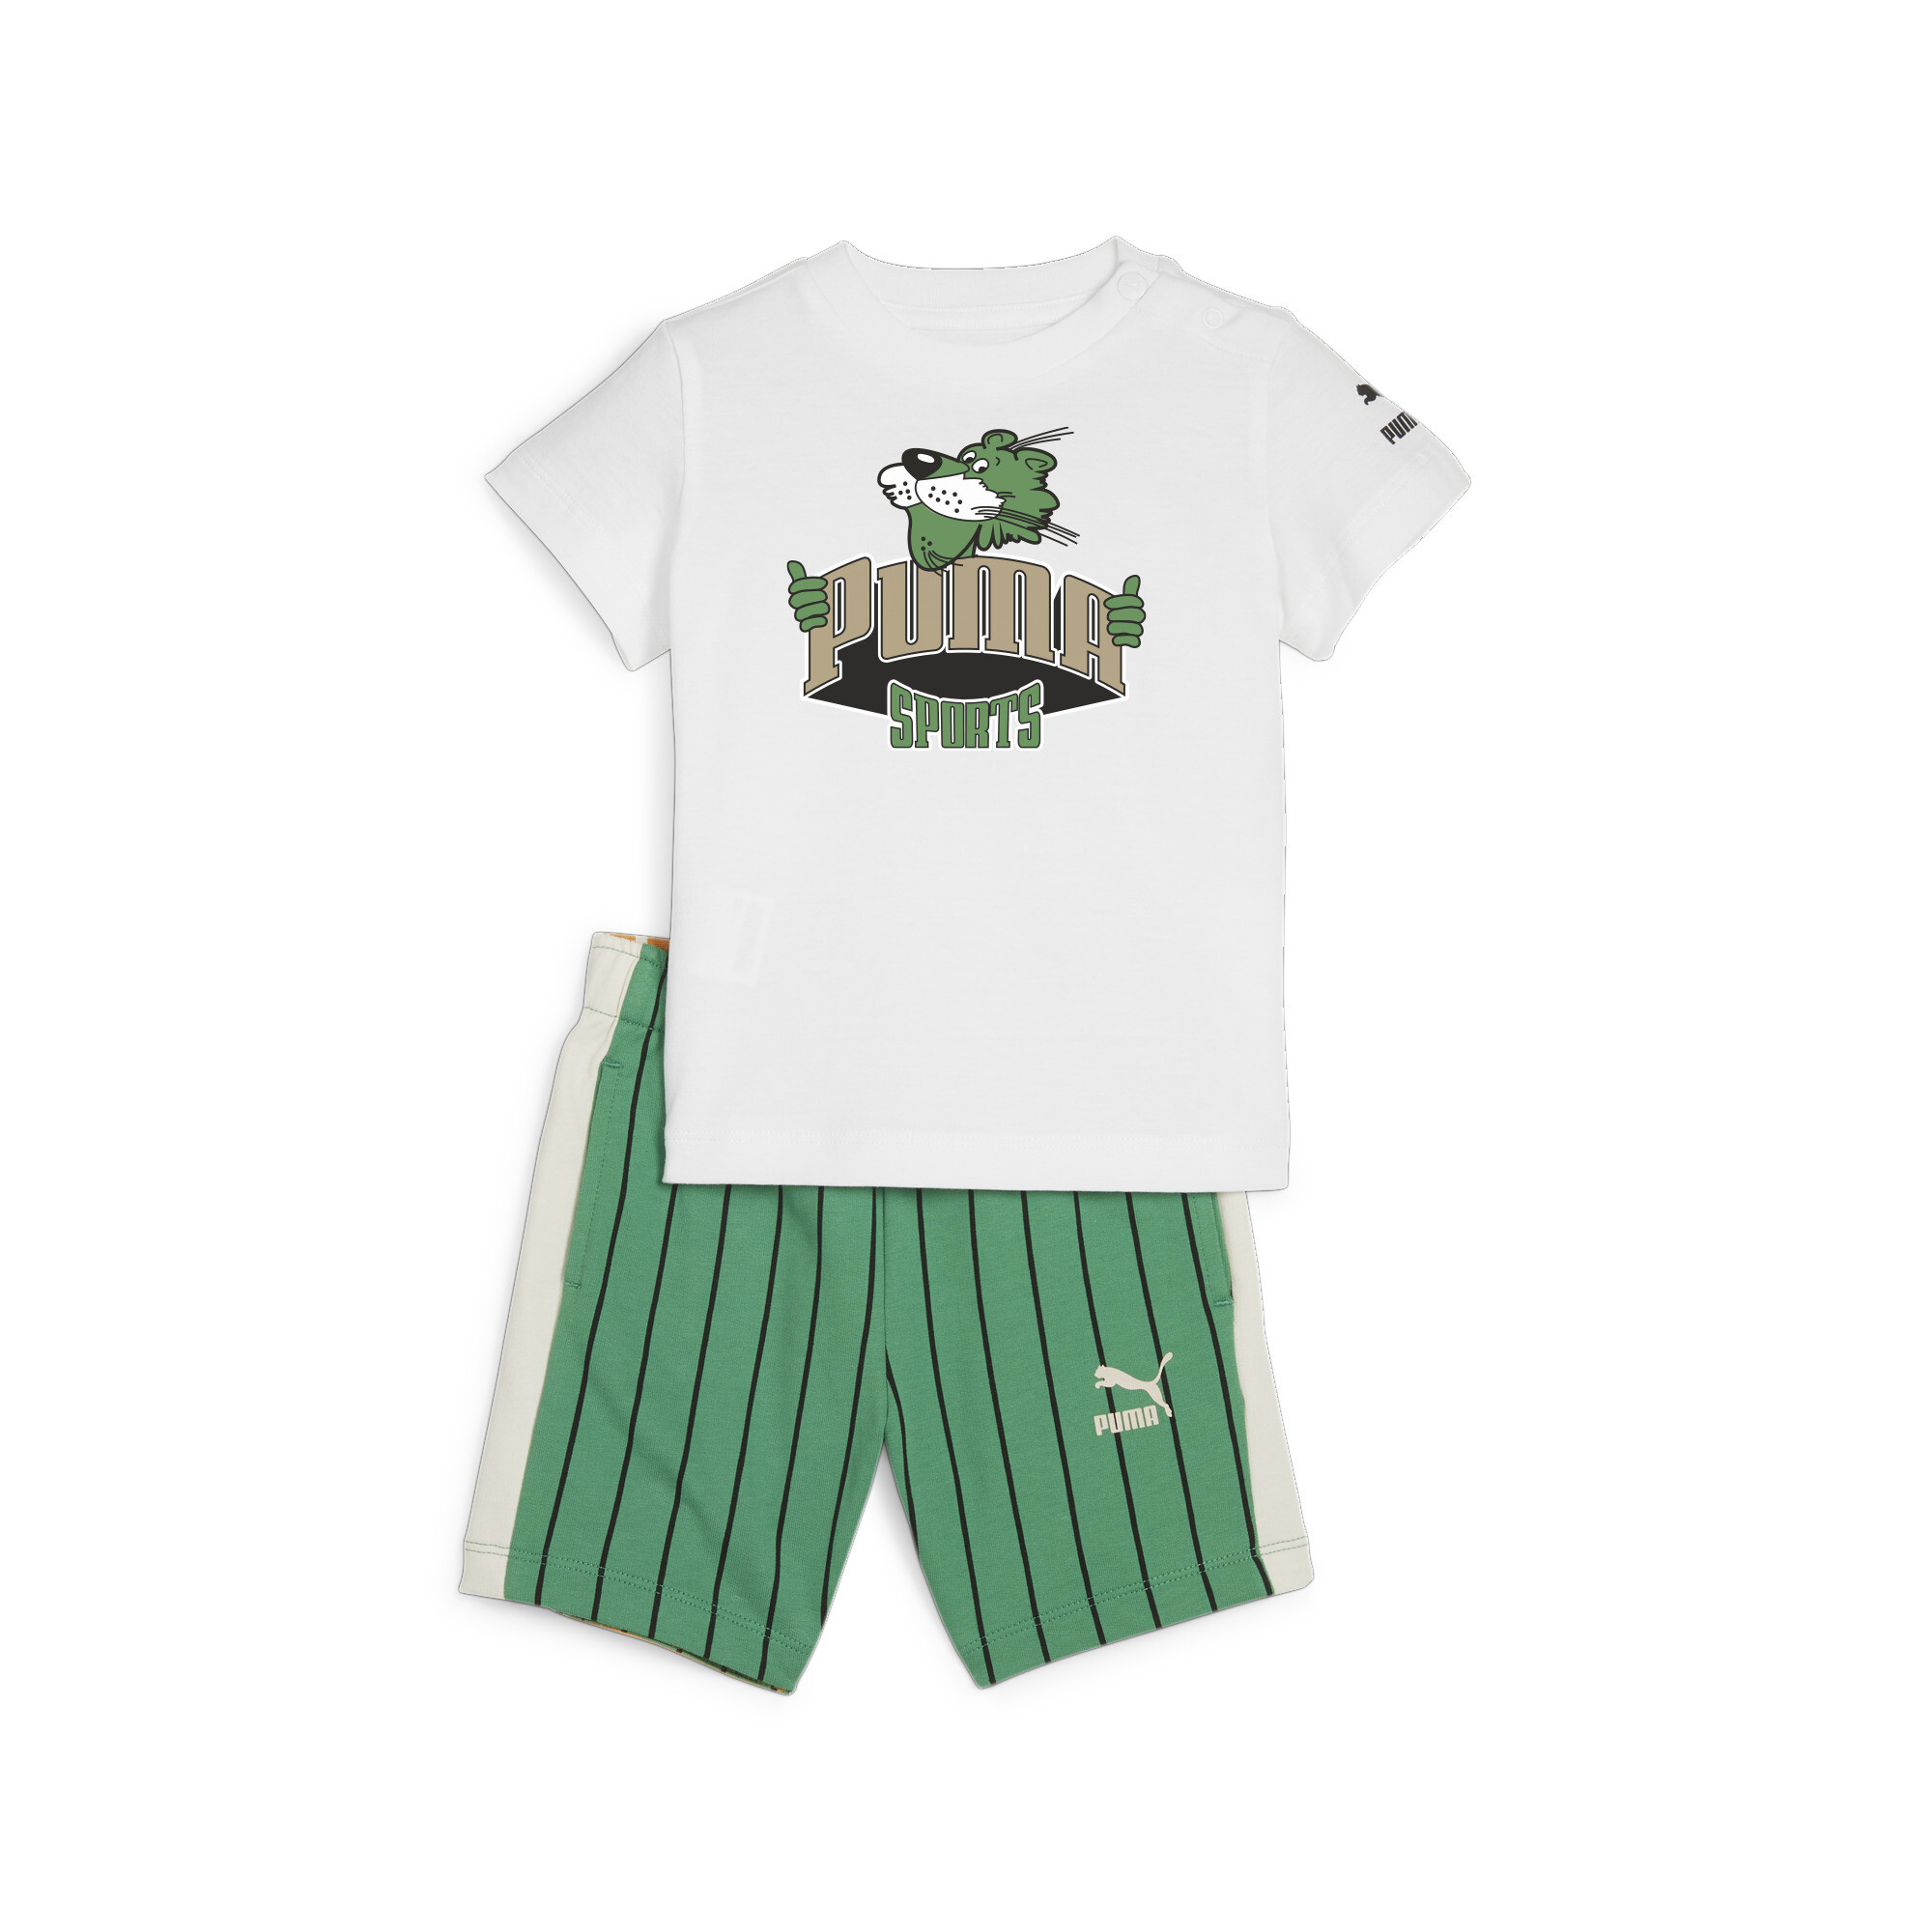 Kids' PUMA MINICATS FANBASE Toddlers' Set In White, Size 2-4 Months